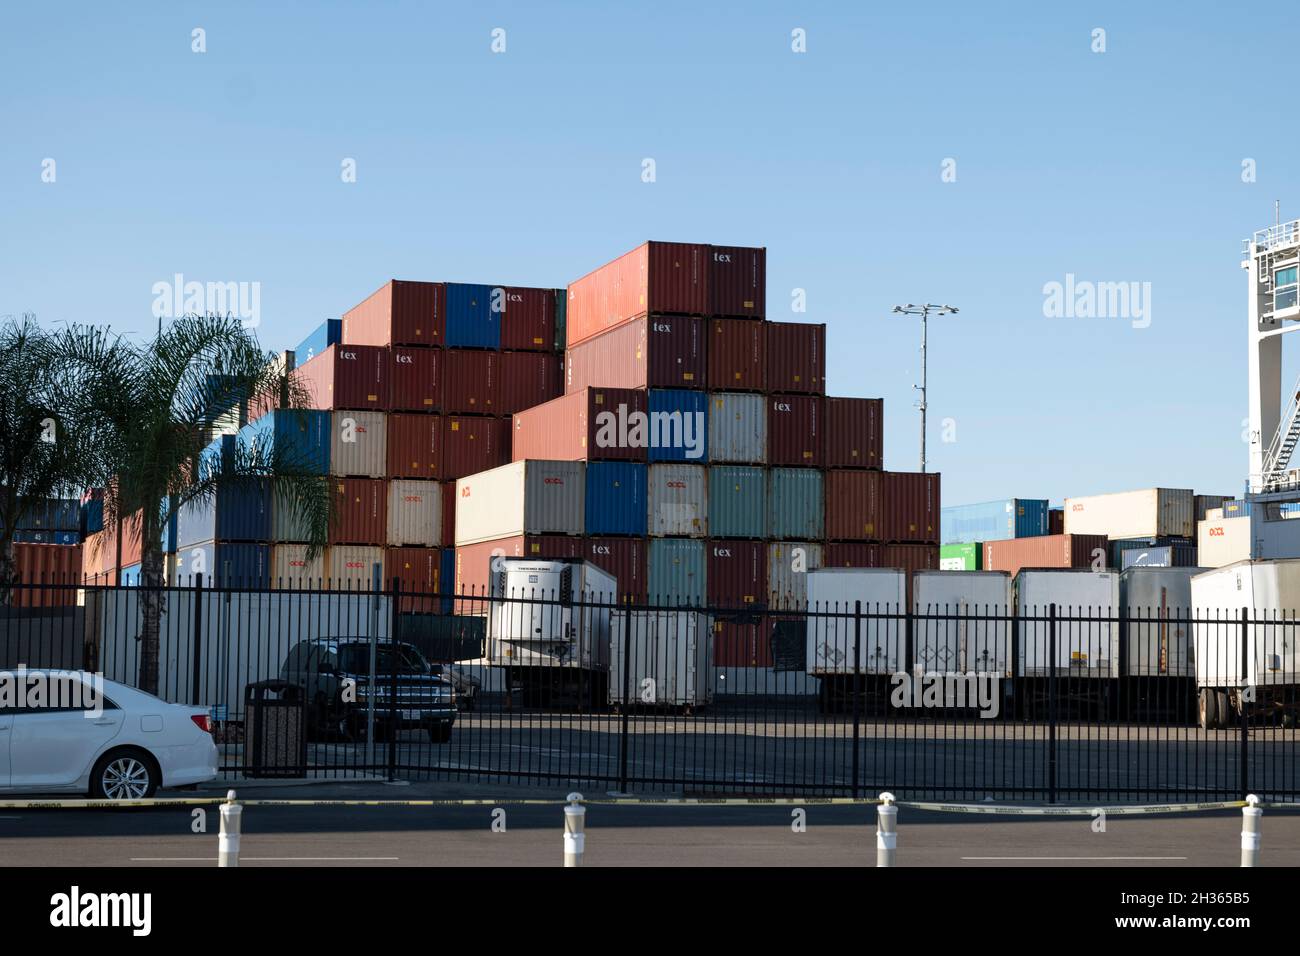 Los Angeles, CA USA - July 16, 2021: Shipping containers stacked near trucks at the Port of Los Angeles during supply chain disruption Stock Photo